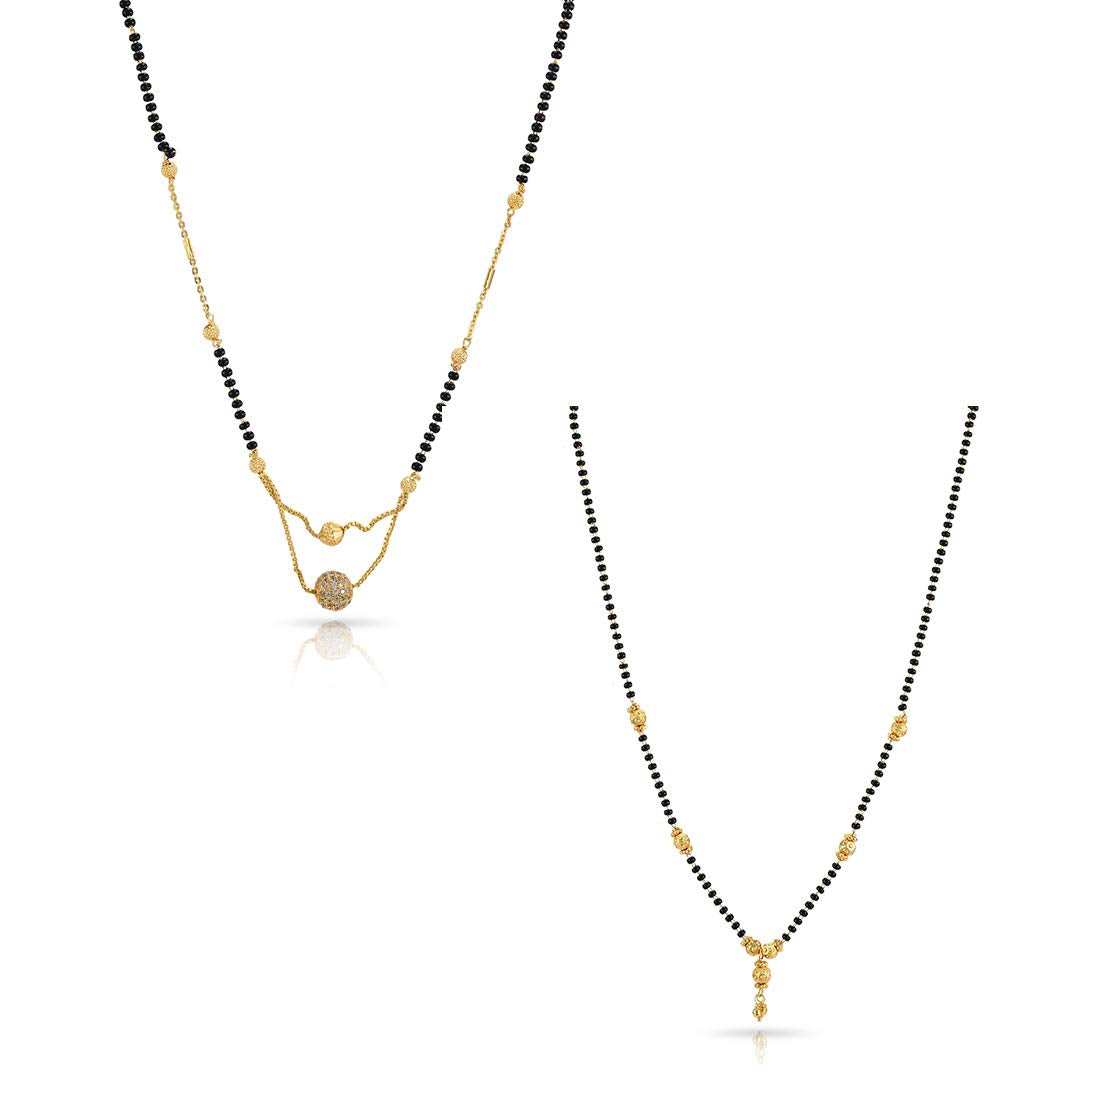 Yellow Chimes Combo of 2 PCs Ethnic Traditional Gold Plated Black Beads Mangalsutra Pendant Necklace for Women and Girls